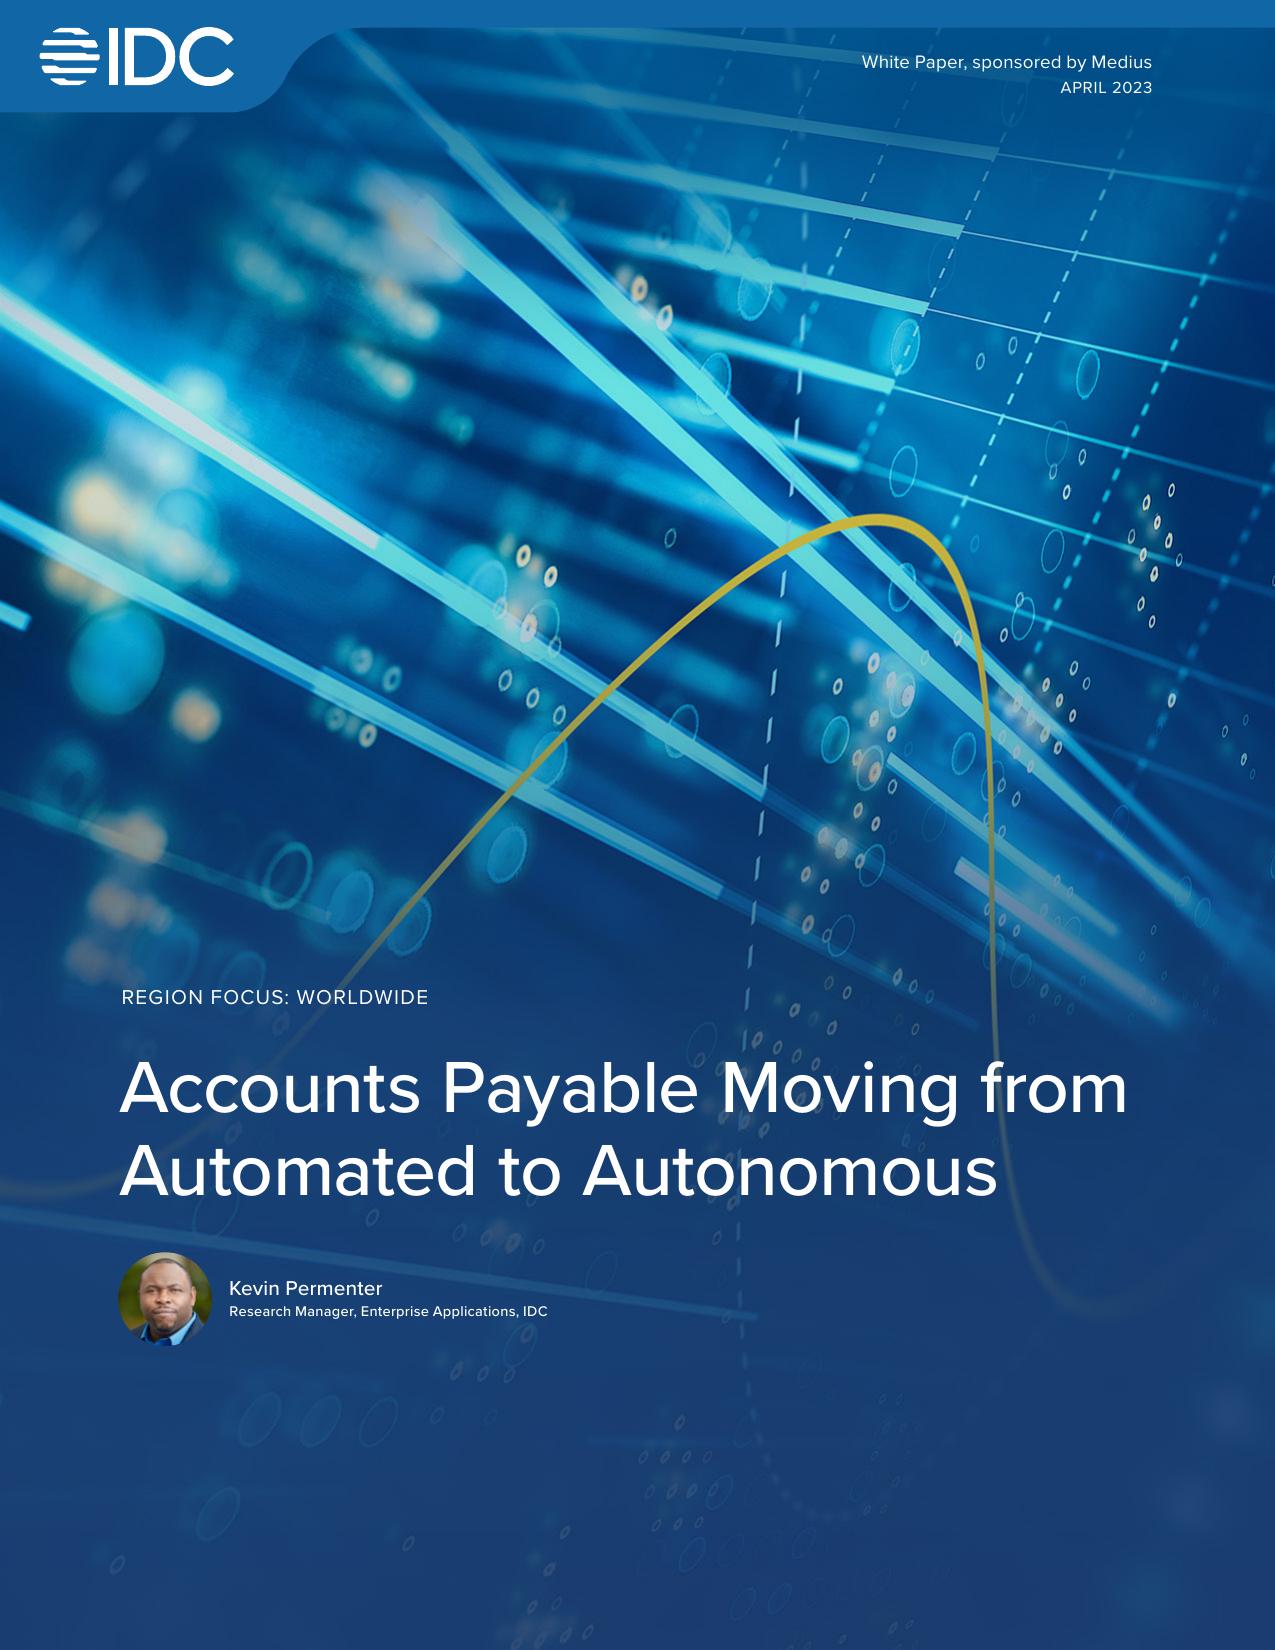 Accounts Payable Moving from Automated to Autonomous